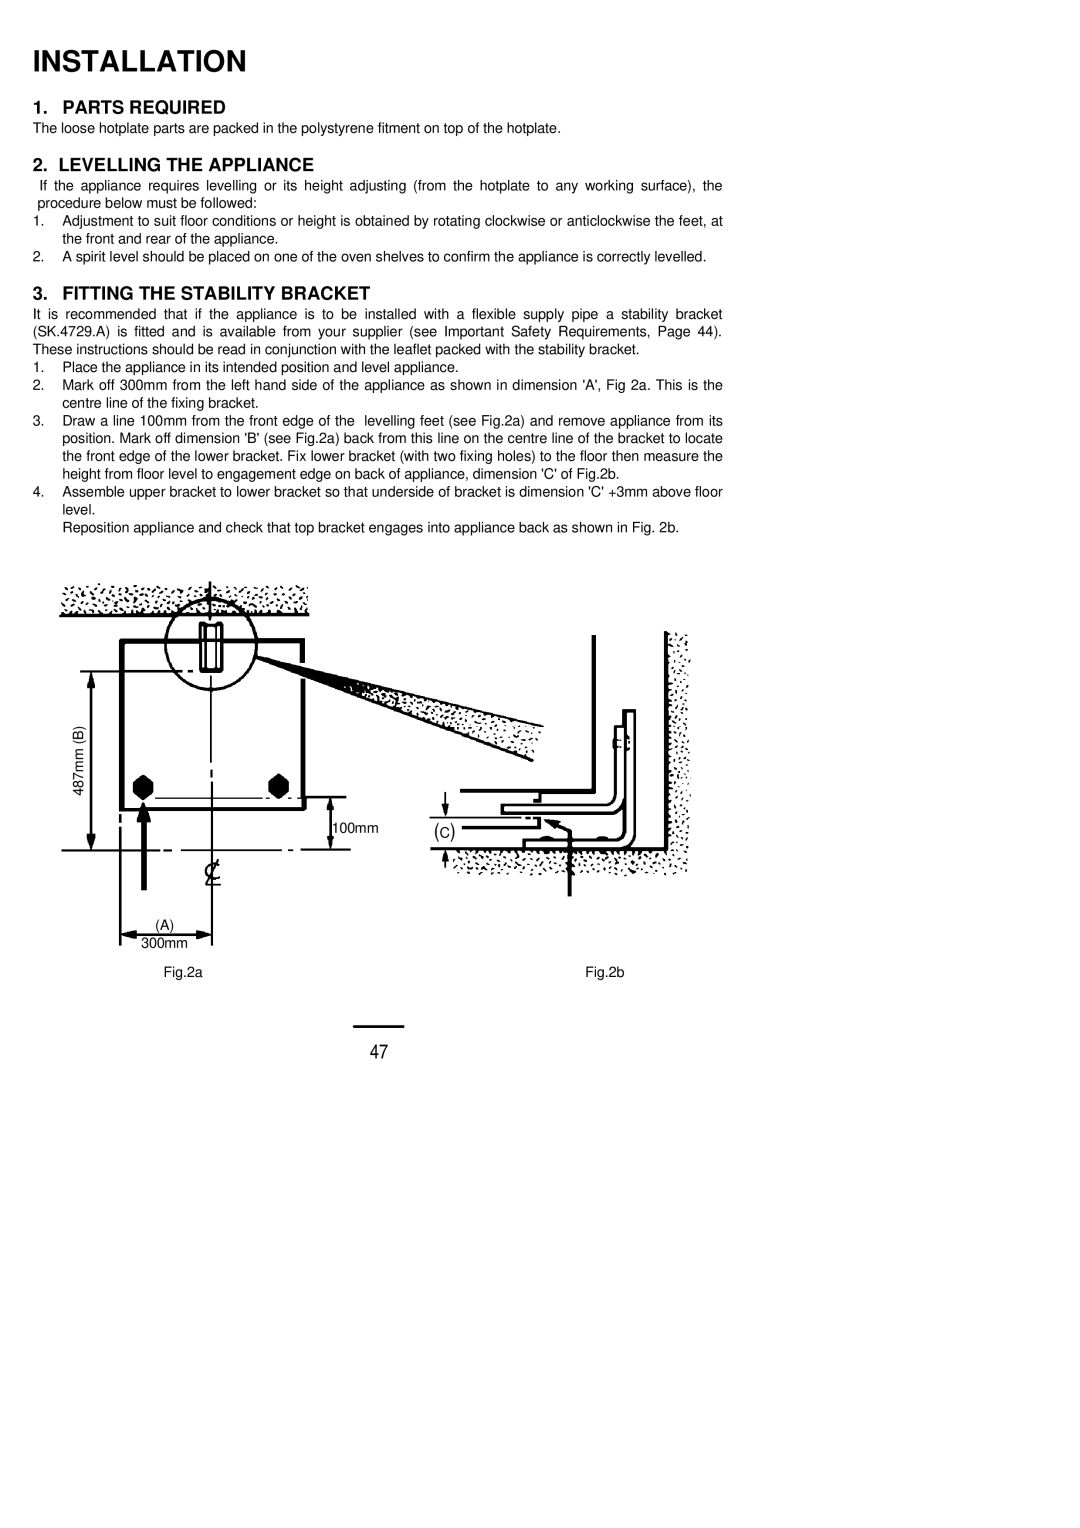 Zanussi ZCG ID manual Parts Required, Levelling the Appliance, Fitting the Stability Bracket 